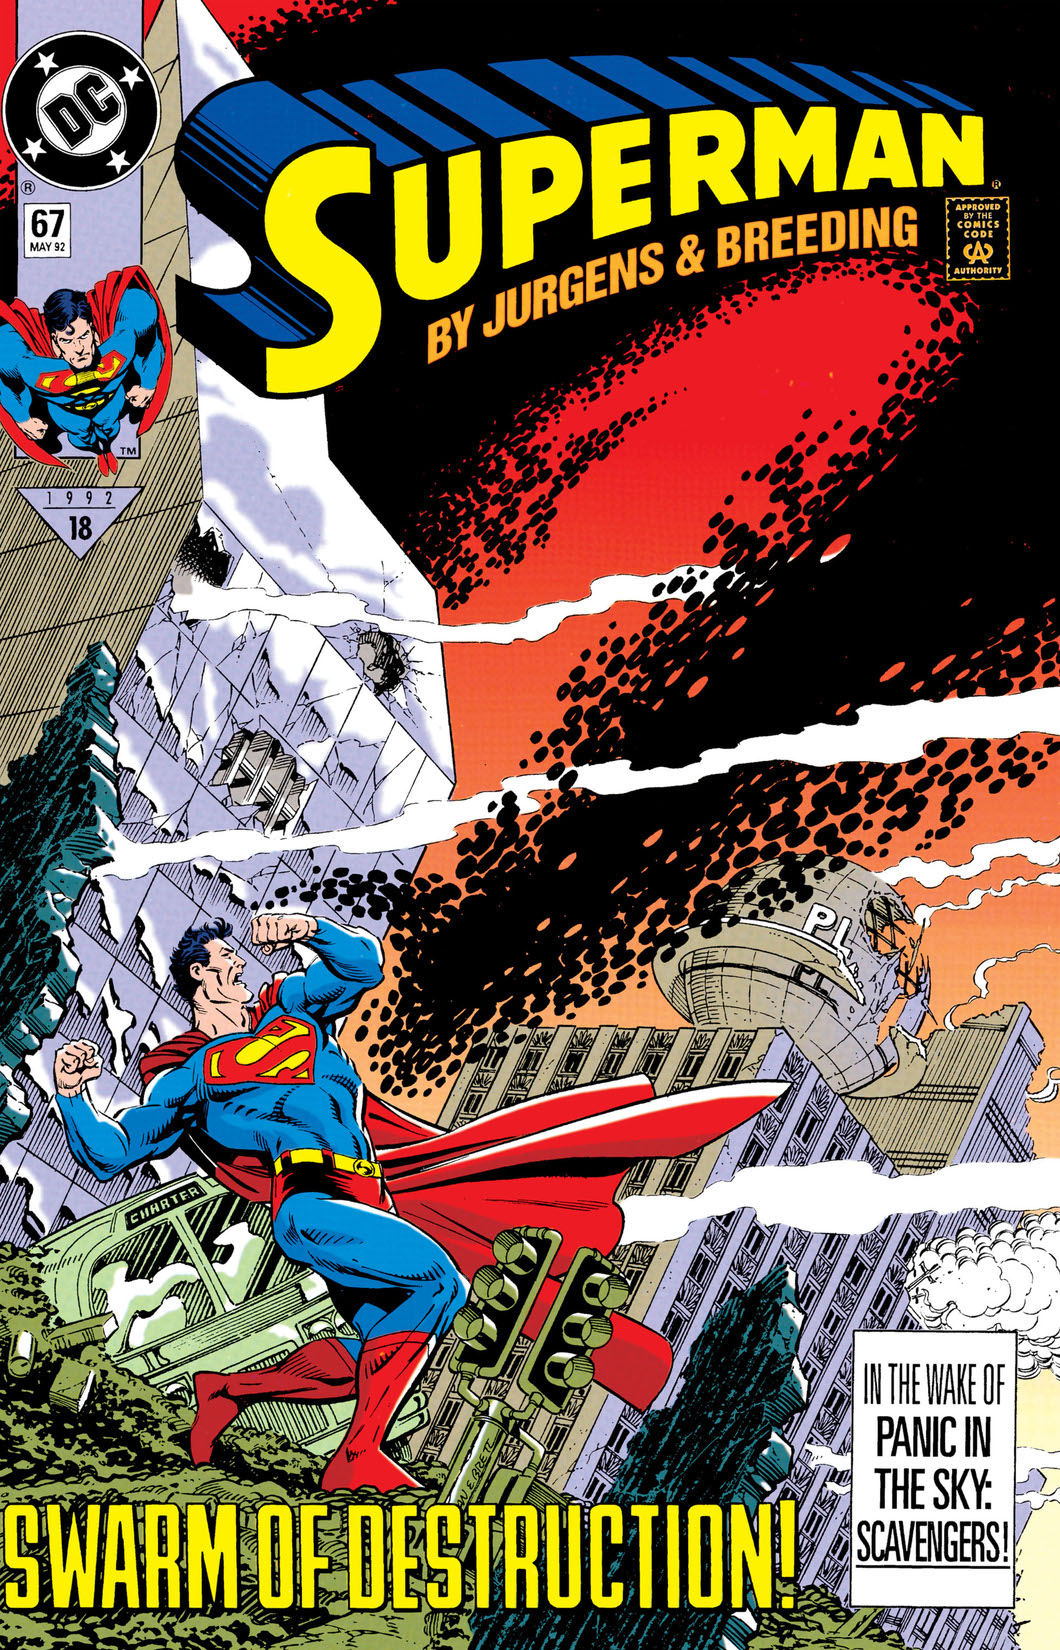 Superman (1986-) #67 preview images